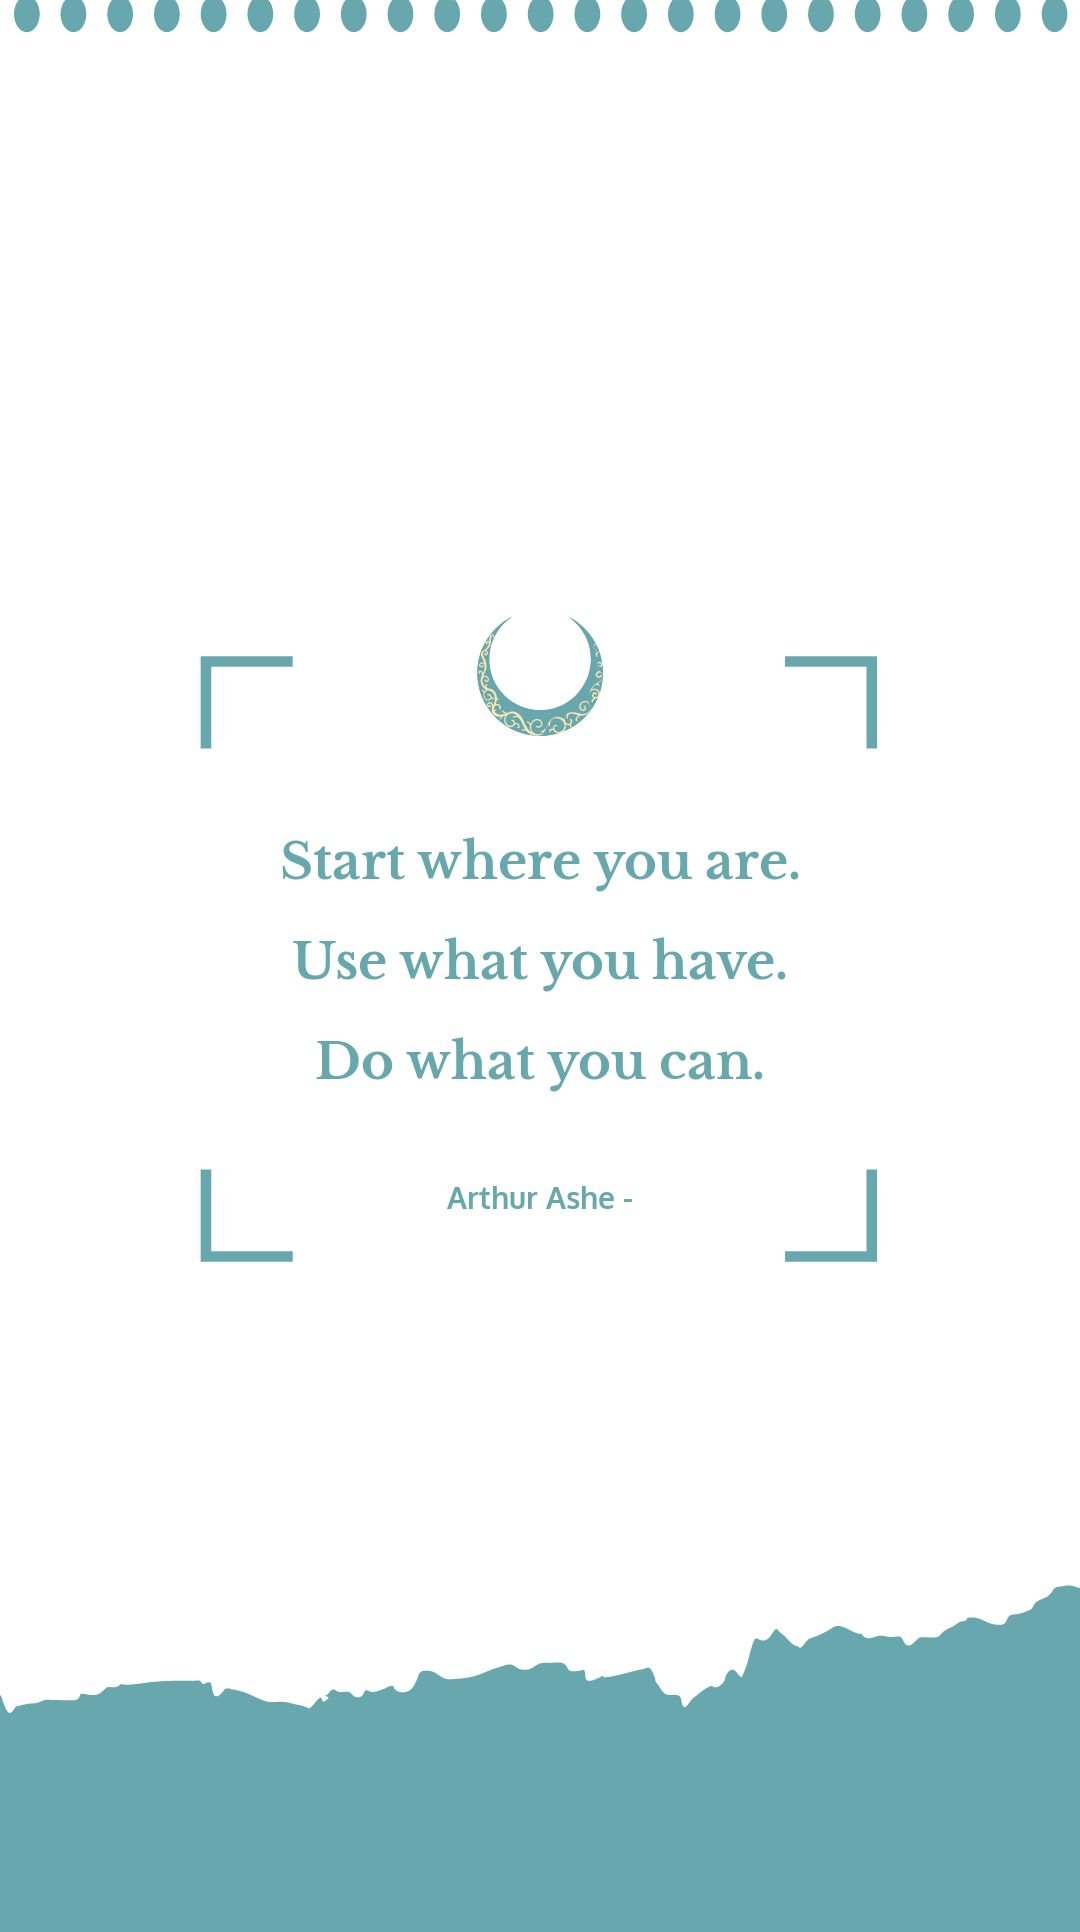 Arthur Ashe - Start where you are. Use what you have. Do what you can.